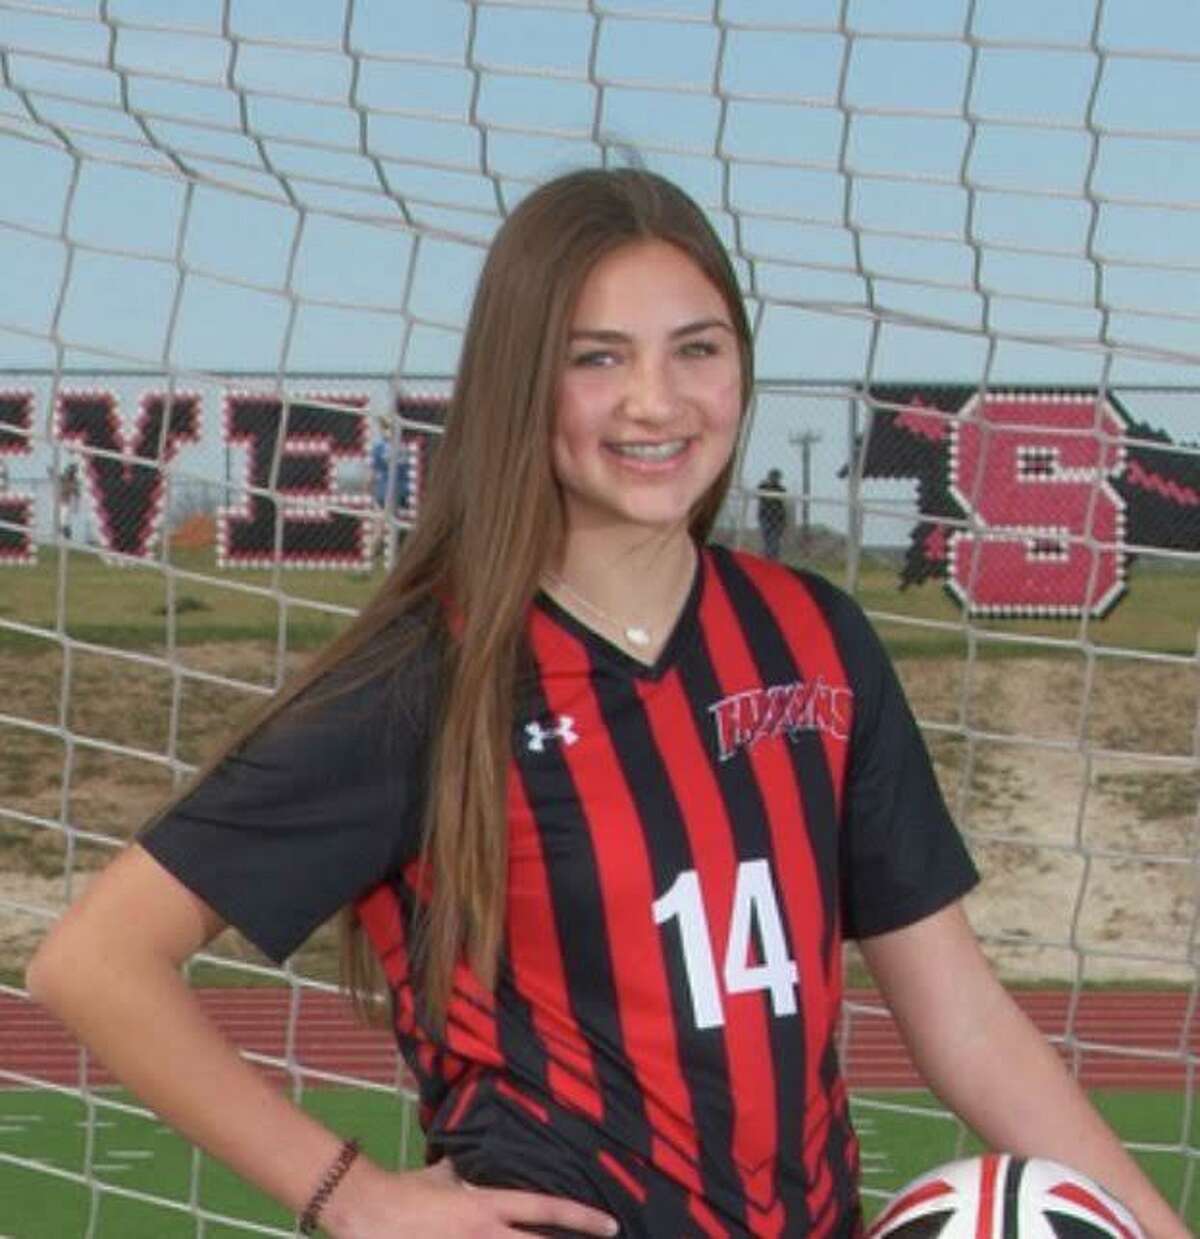 Steven freshman Gabrielle Ceballos was selected as the Express-News girls soccer Newcomer of the Year for 2020.